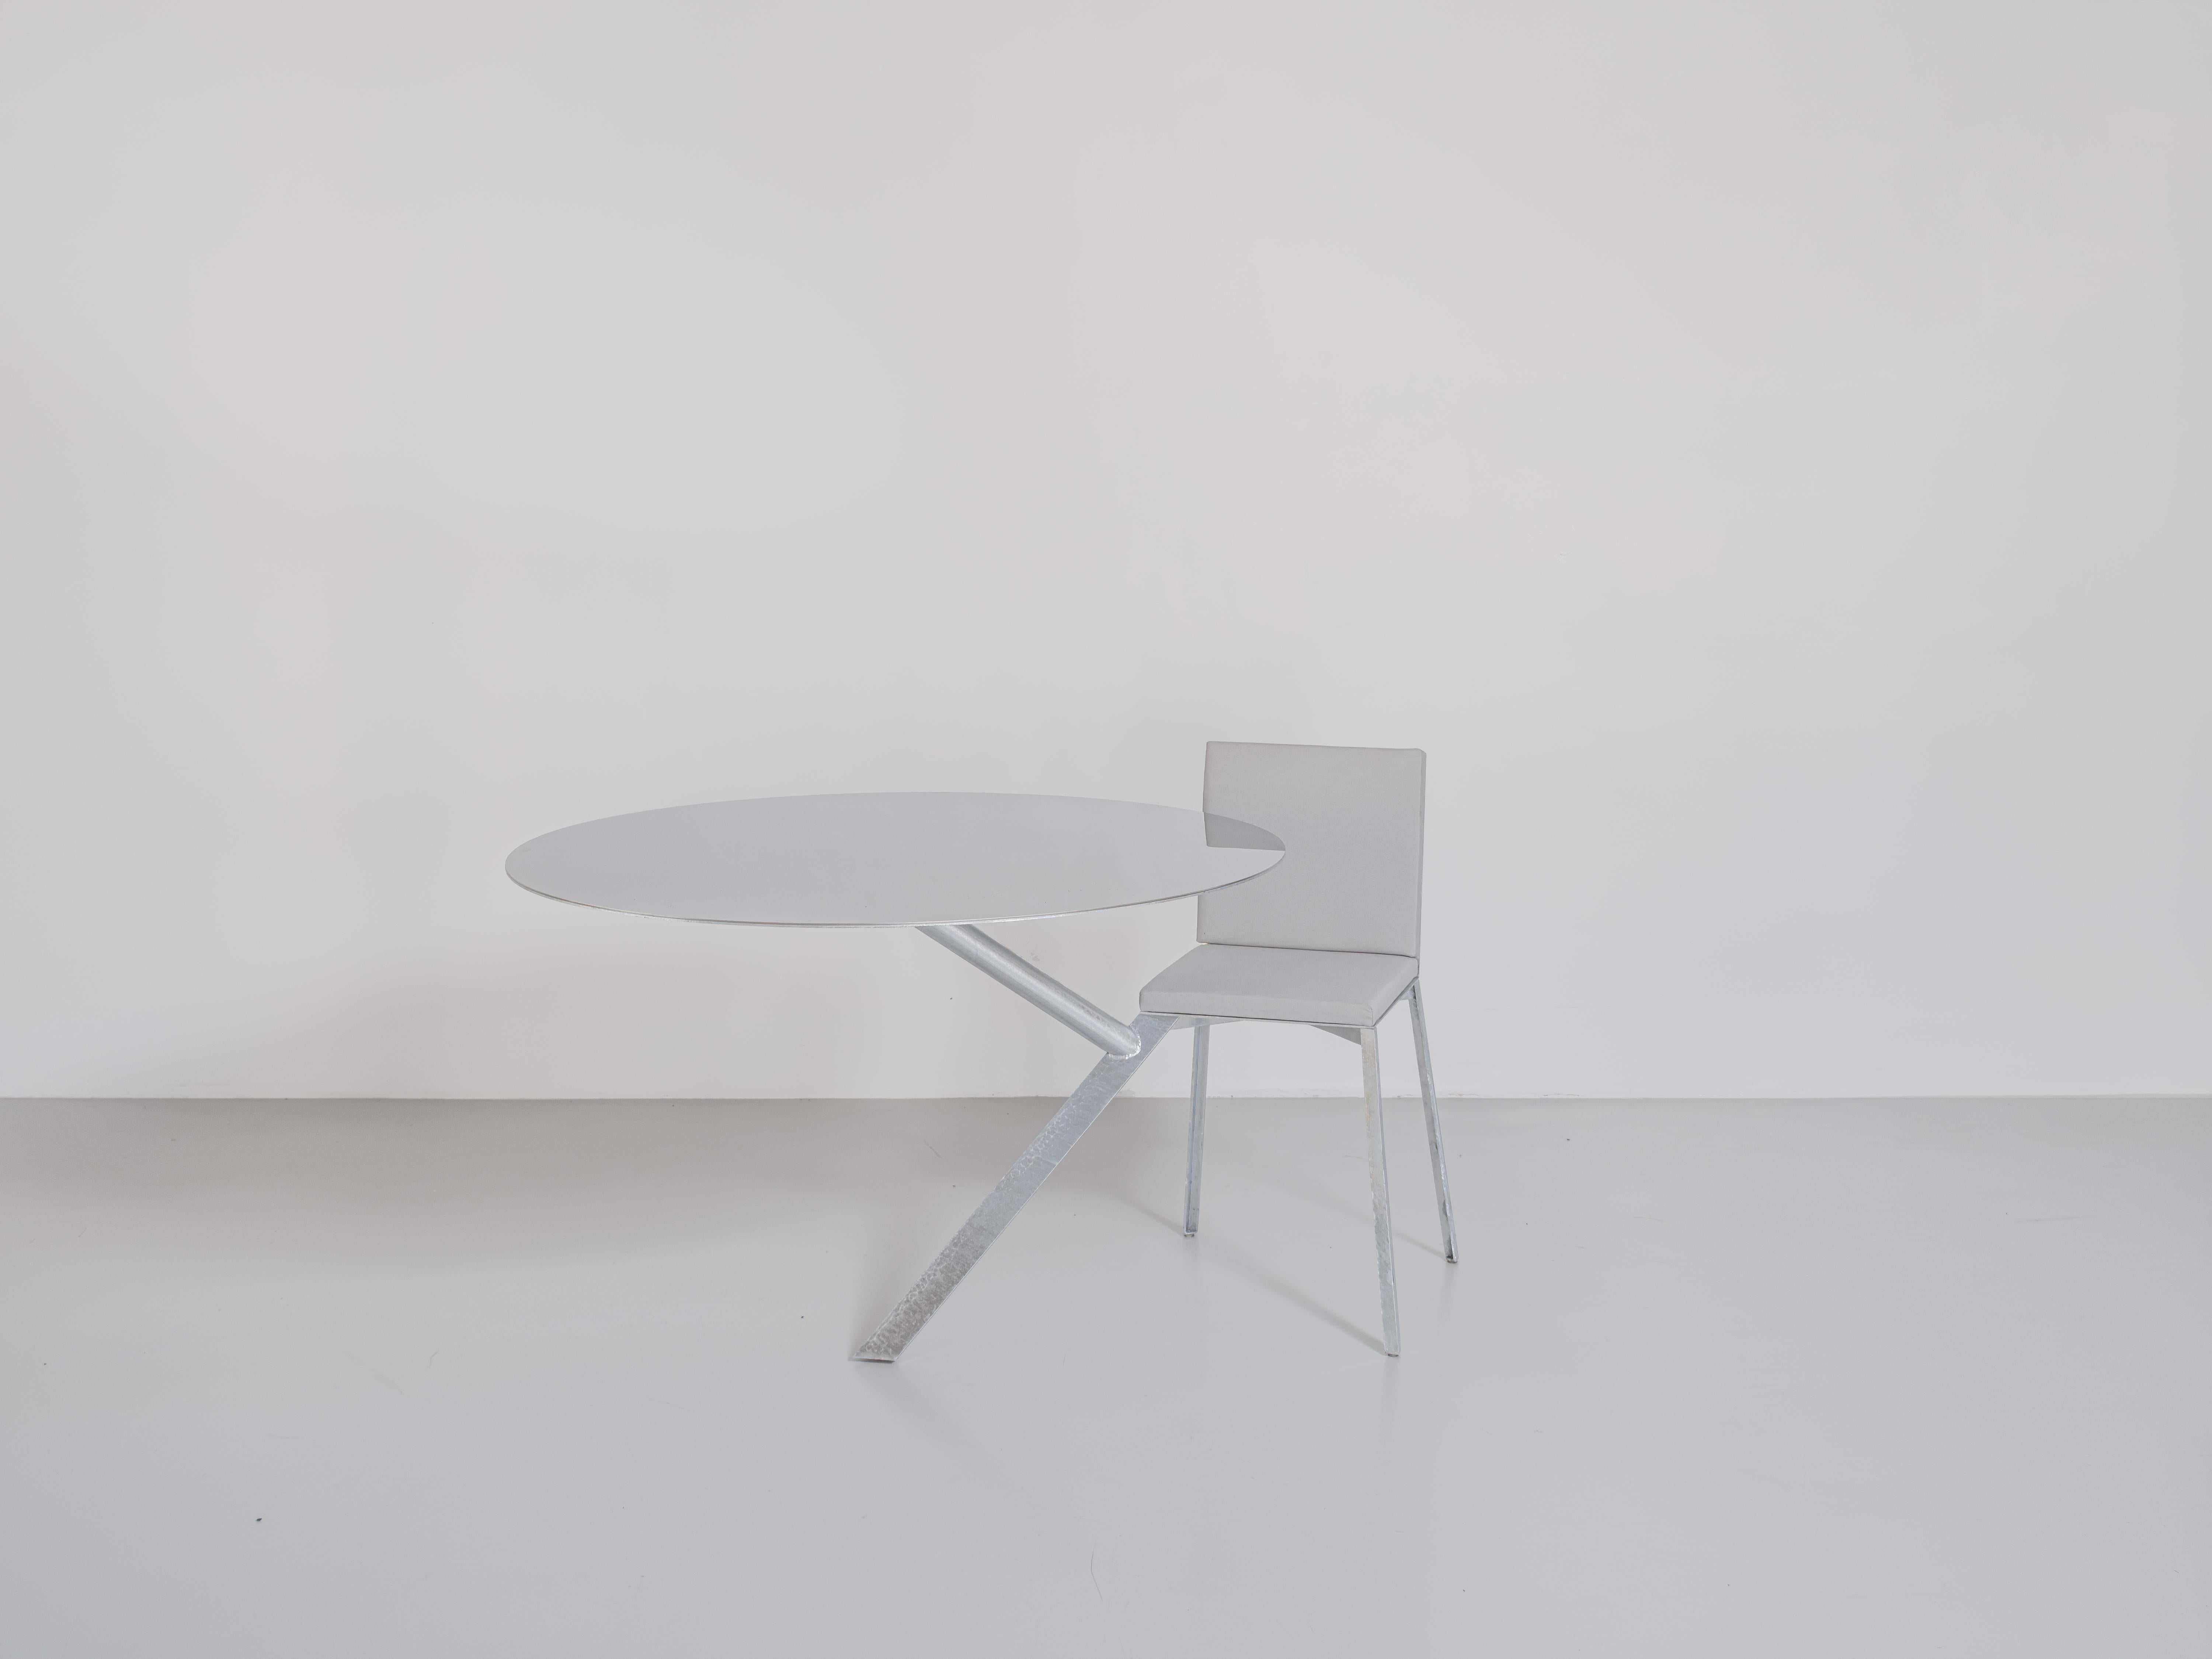 chair with table attached